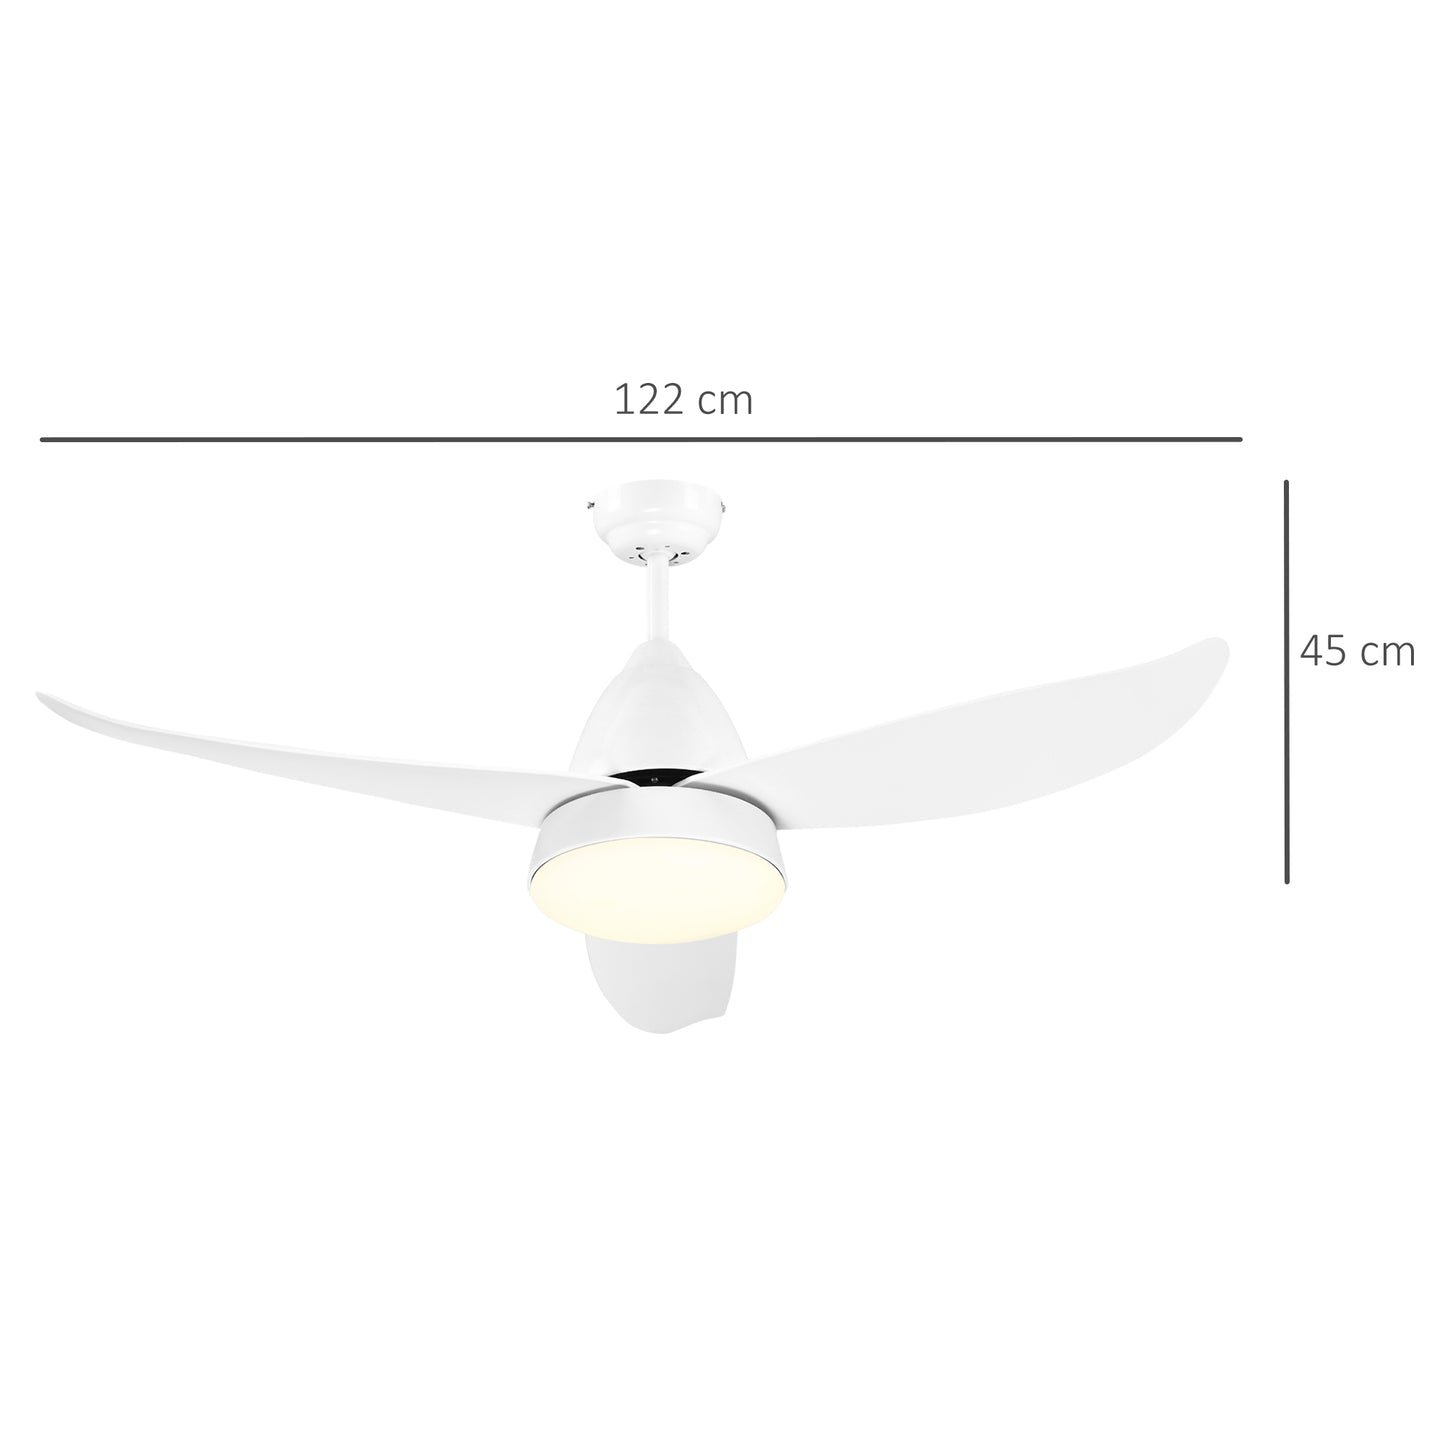 HOMCOM Reversible Ceiling Fan with Light, 3 Blades Indoor Modern Mount White LED Lighting Fan with Remote Controller, for Bedroom, Living Room, White